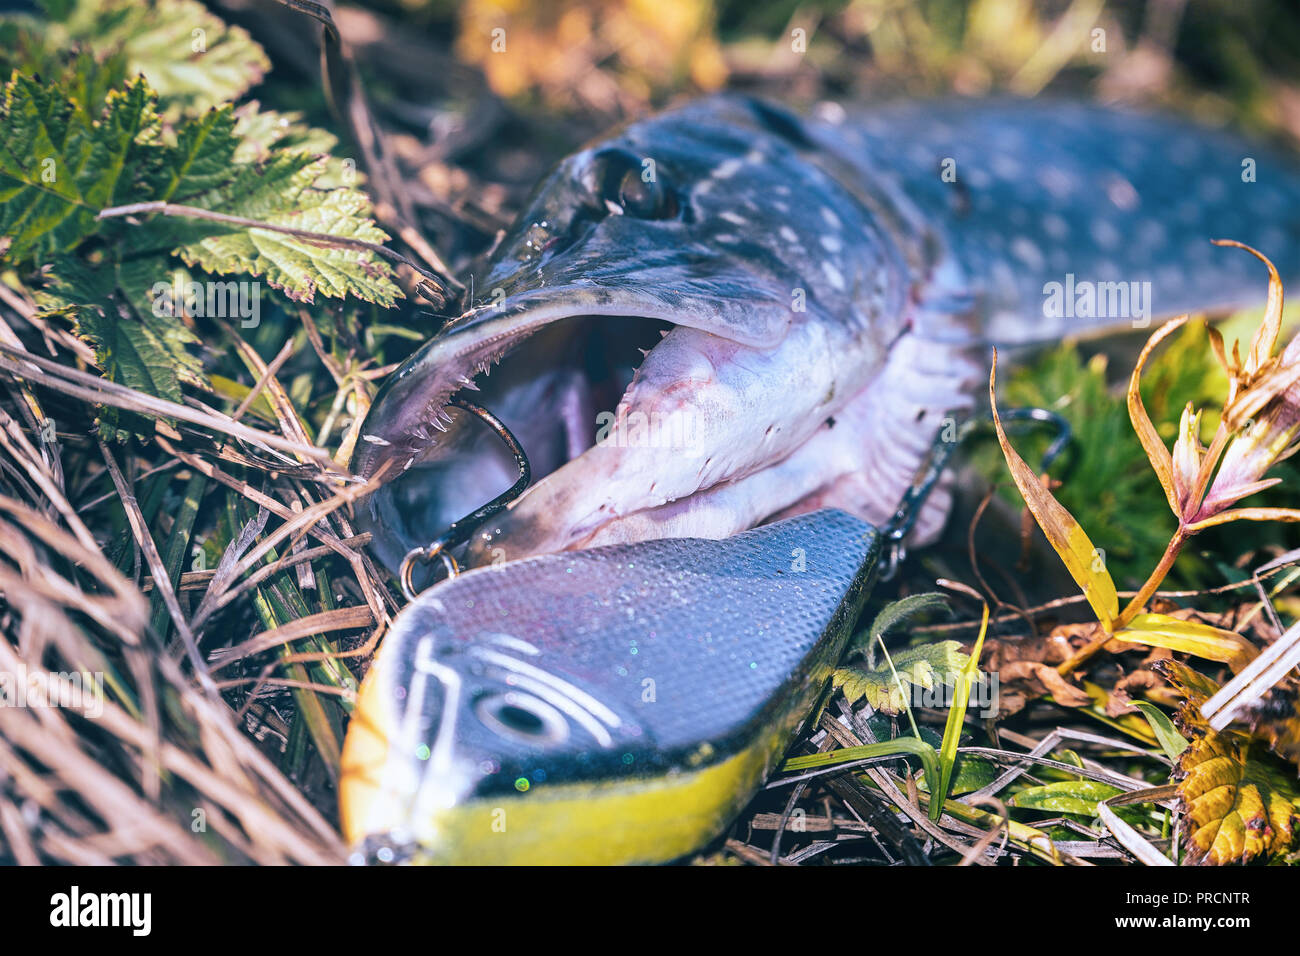 Pike on grass with bait in a mouth Stock Photo